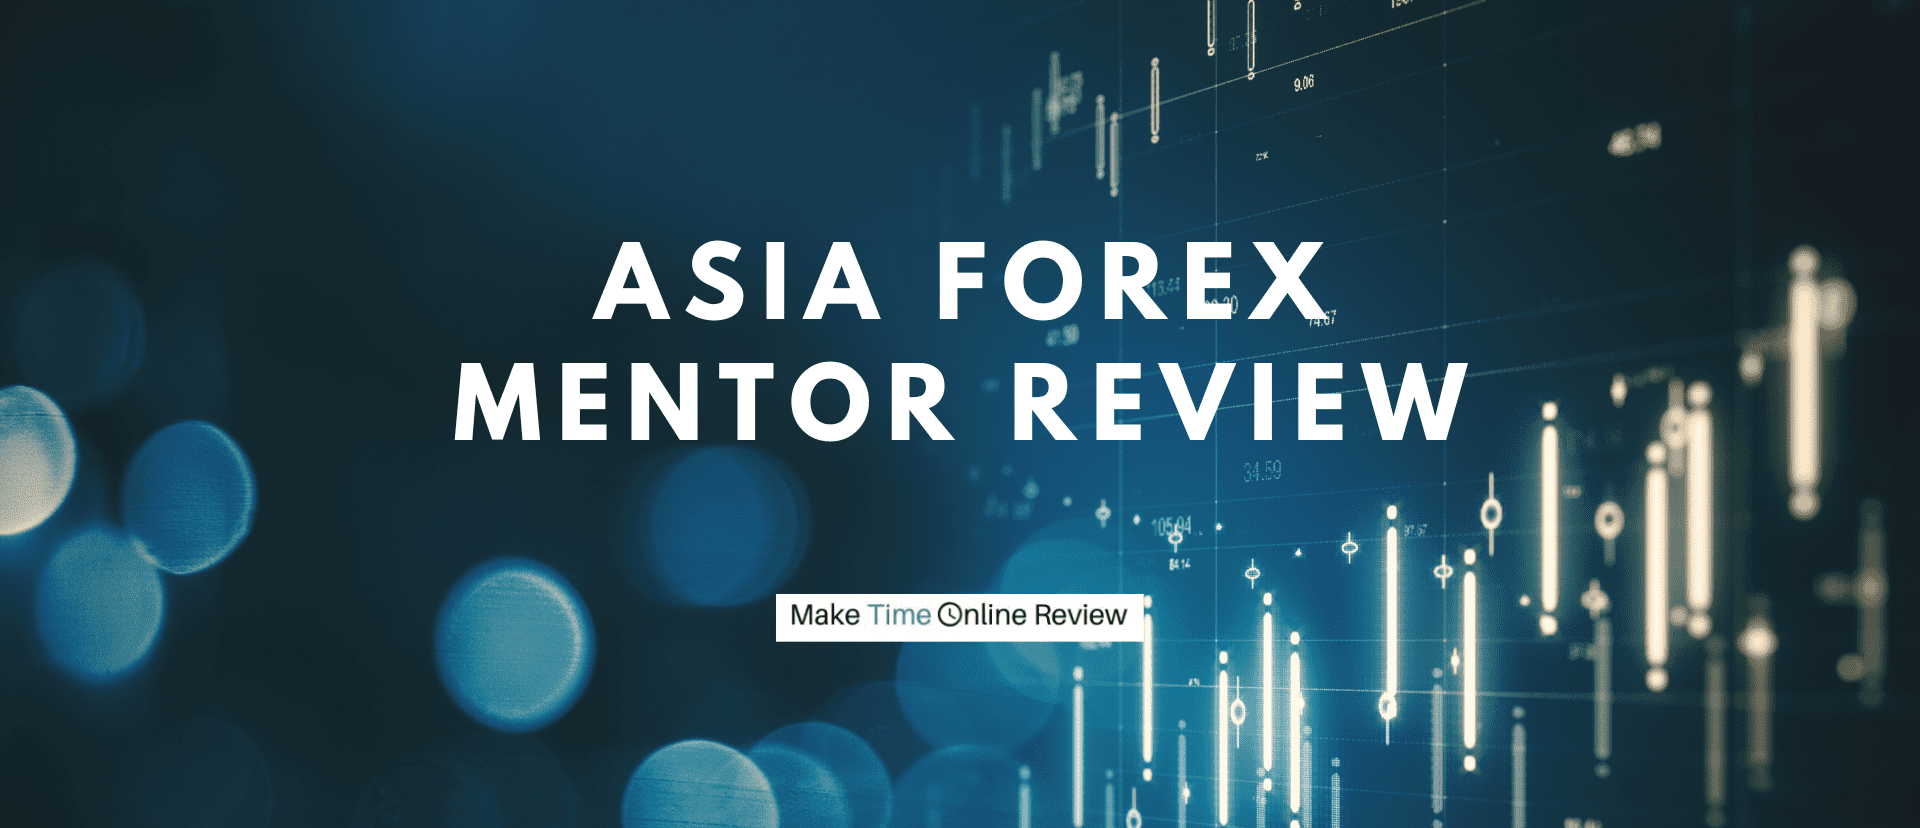 Asia Forex Mentor Review